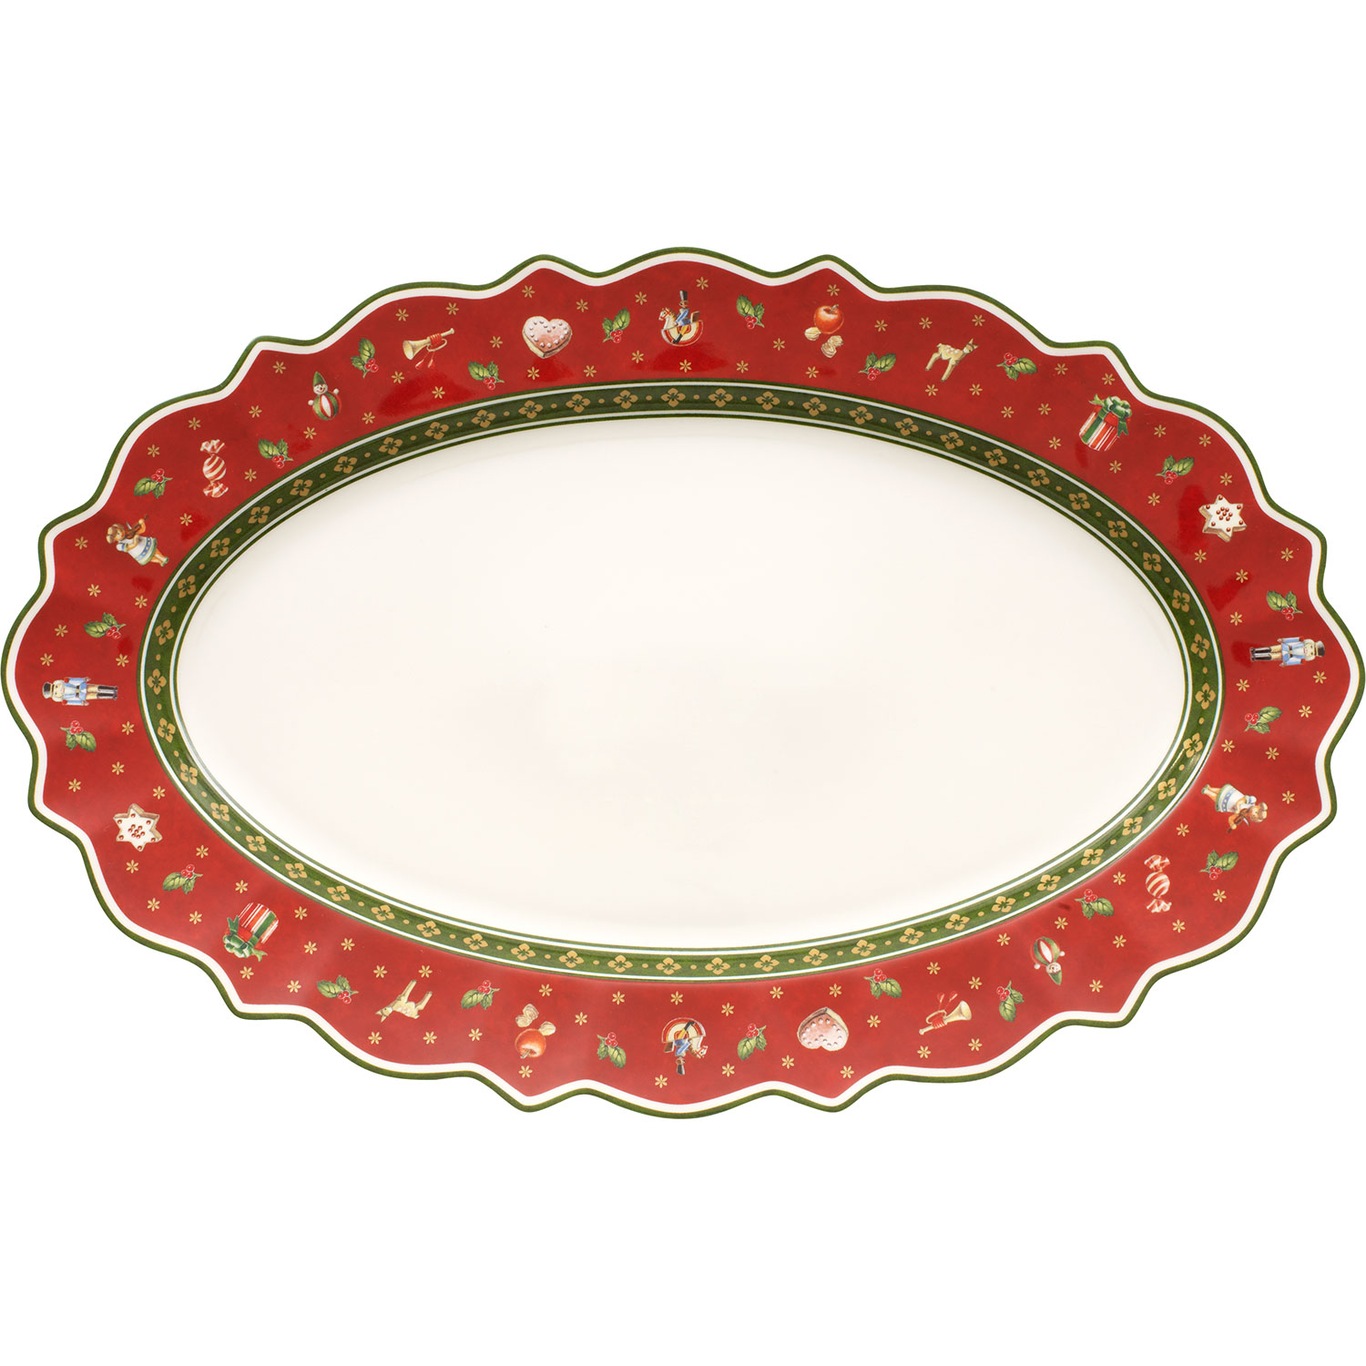 Toy's Delight Serving Dish, 31.5x4.5x50 cm